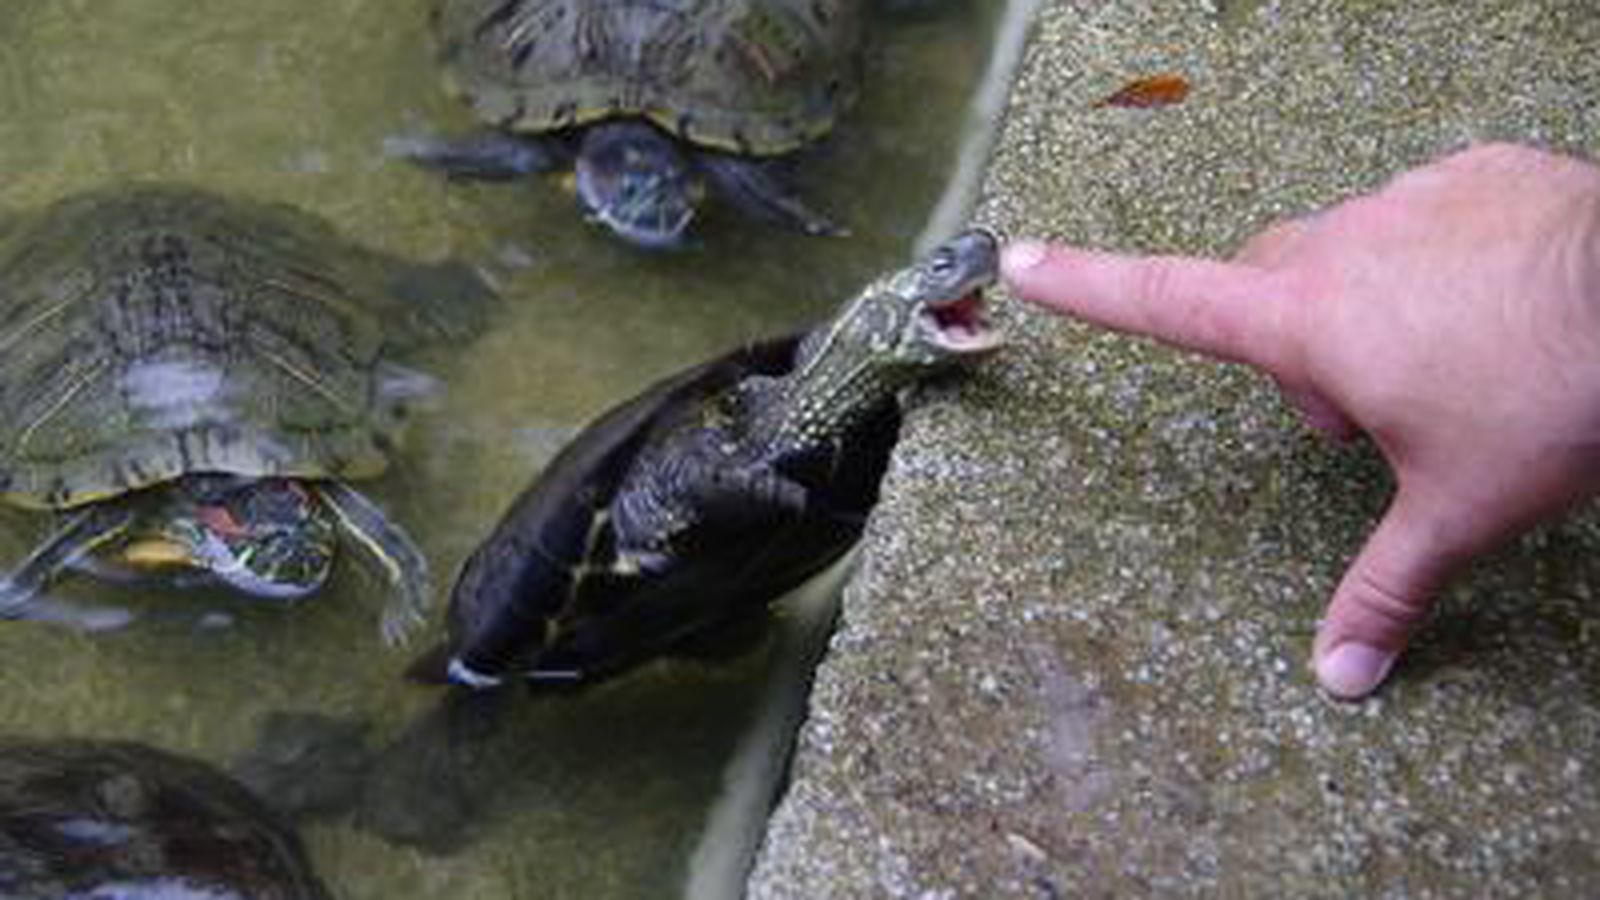 HOW PLAUSIBLE IS THIS: TURTLE BITES OHIO MAN - Every Day Should Be Saturday